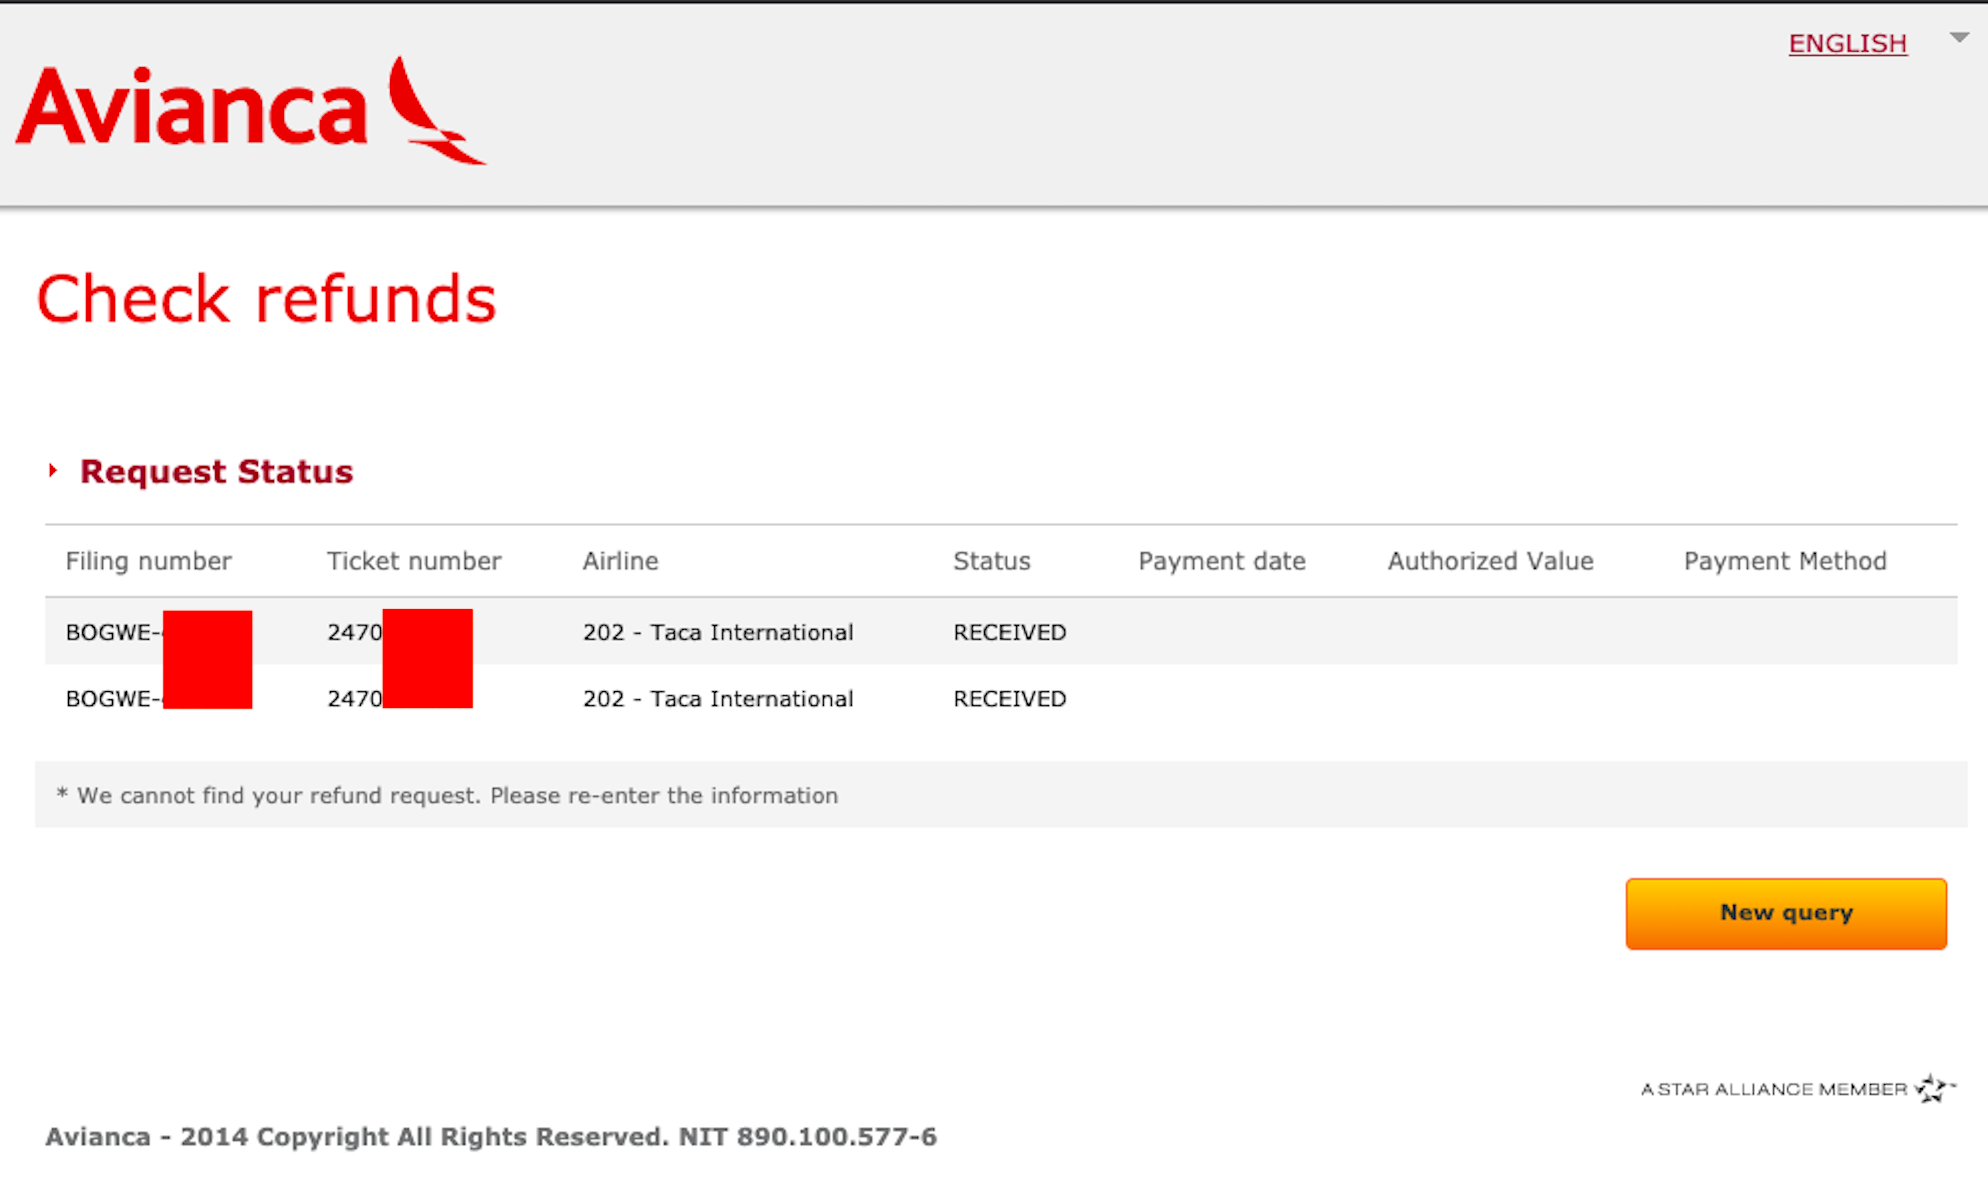 What's Your Avianca Refund Status? Hard To Tell In This Dumpster Fire